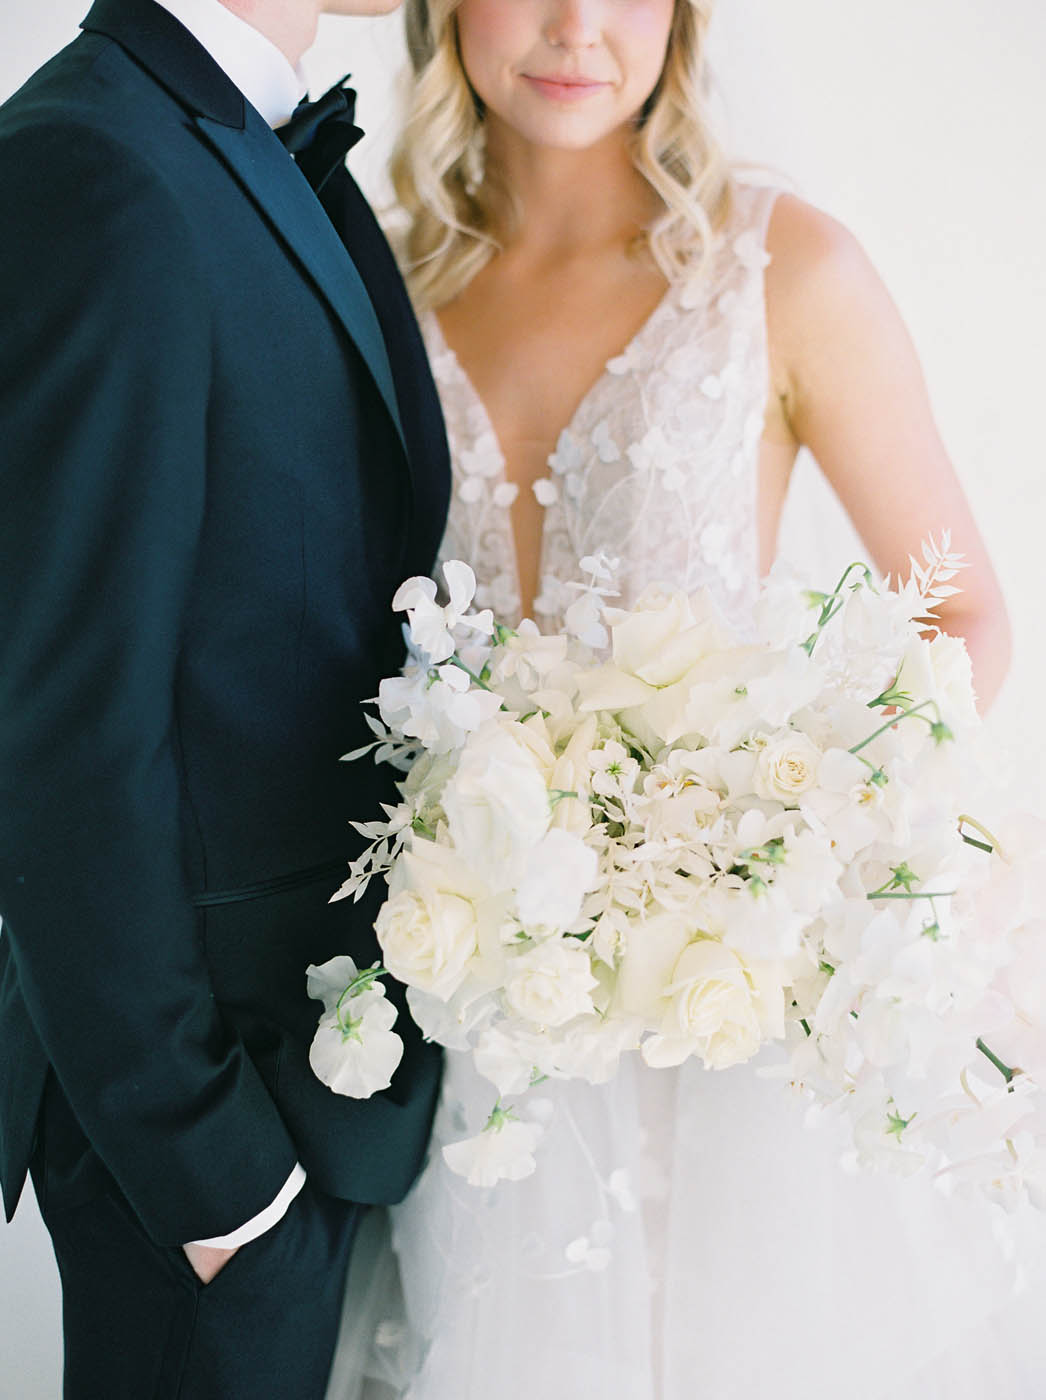 the bride holds her tonal white modern bouquet against the groom's black tux